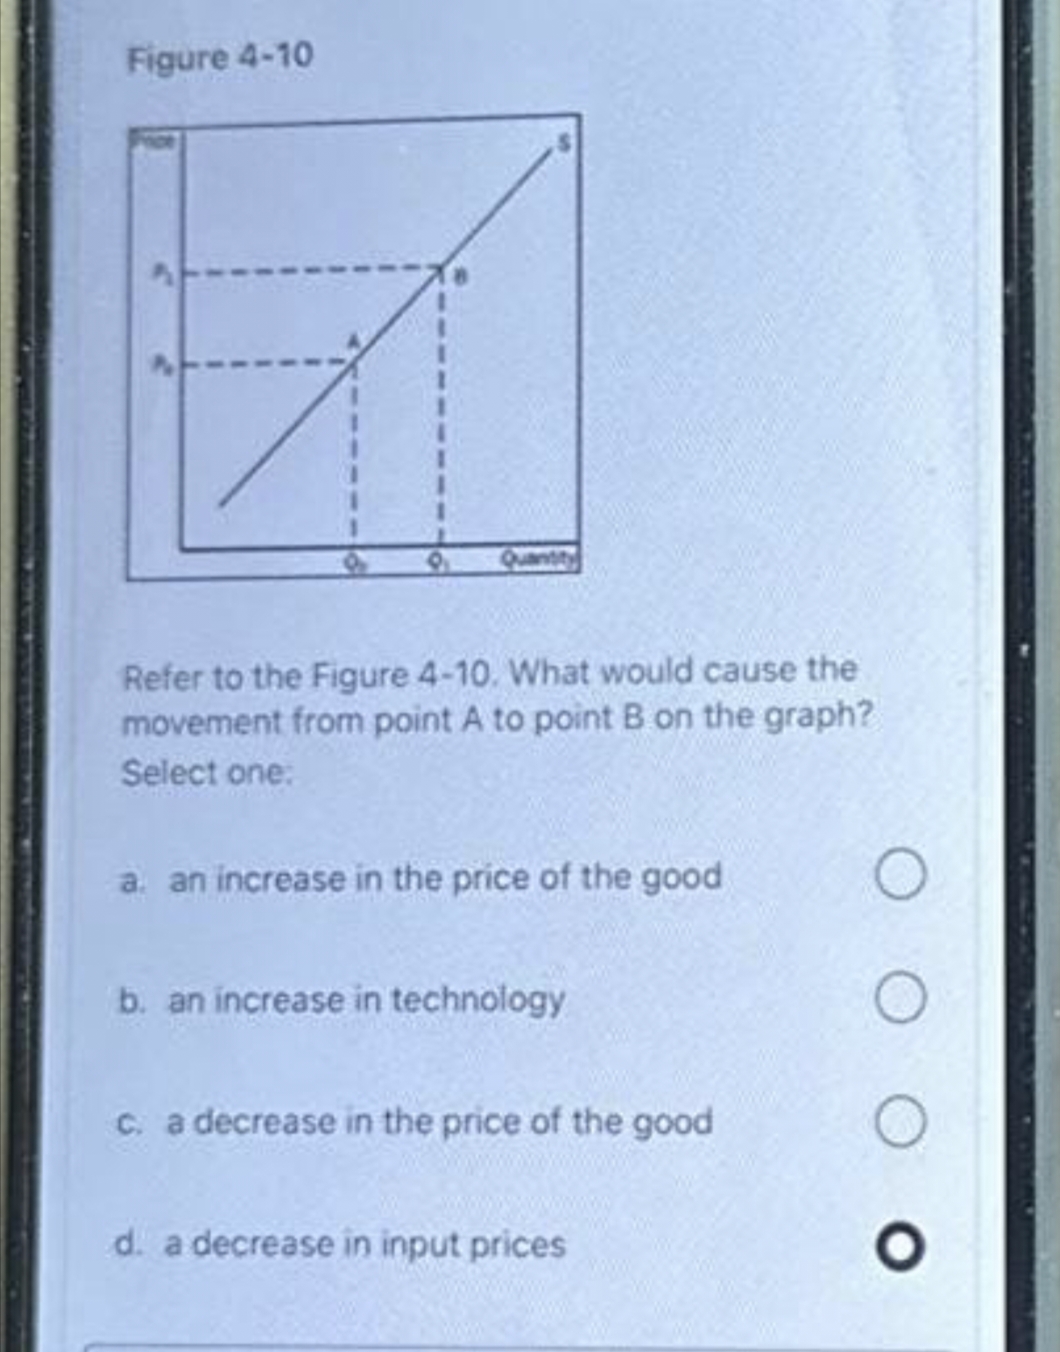 Figure 4-10
Refer to the Figure 4-10. What would cause the
movement from point A to point B on the graph?
Select one:
a. an increase in the price of the good
b. an increase in technology
c. a decrease in the price of the good
d. a decrease in input prices
O
O